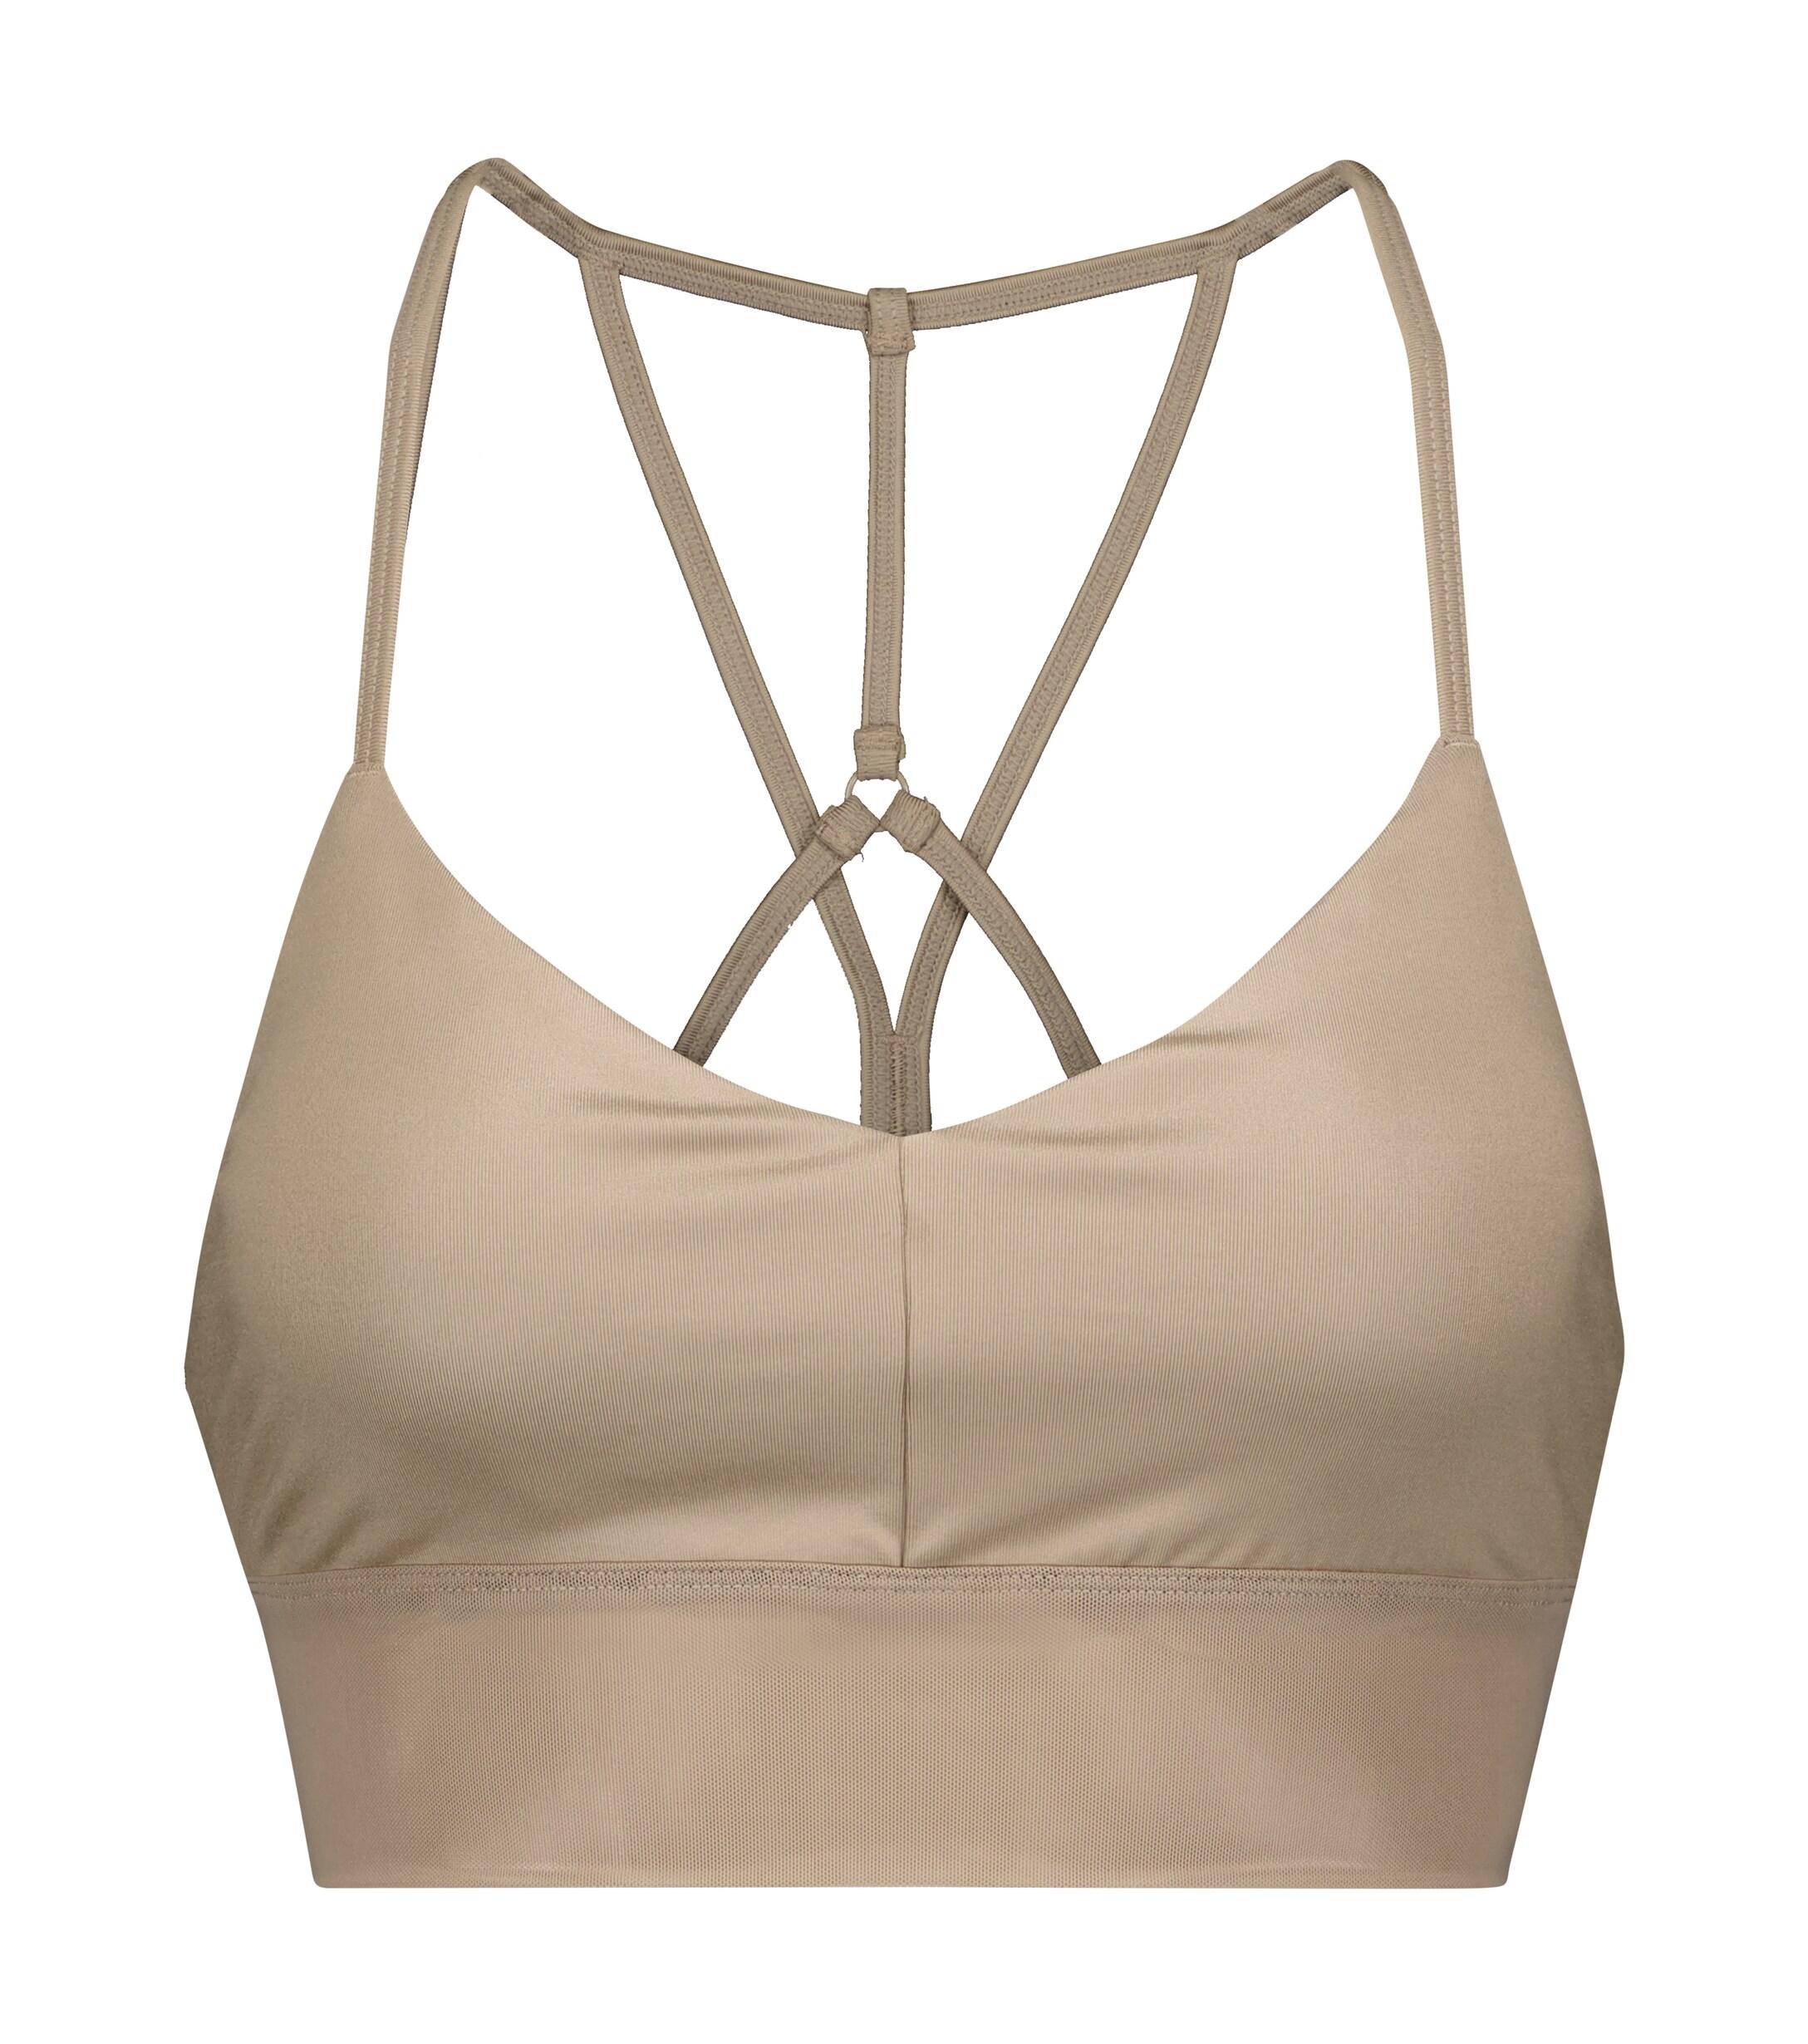 Alo Yoga Synthetic Lavish Sports Bra in Beige (Natural) - Lyst